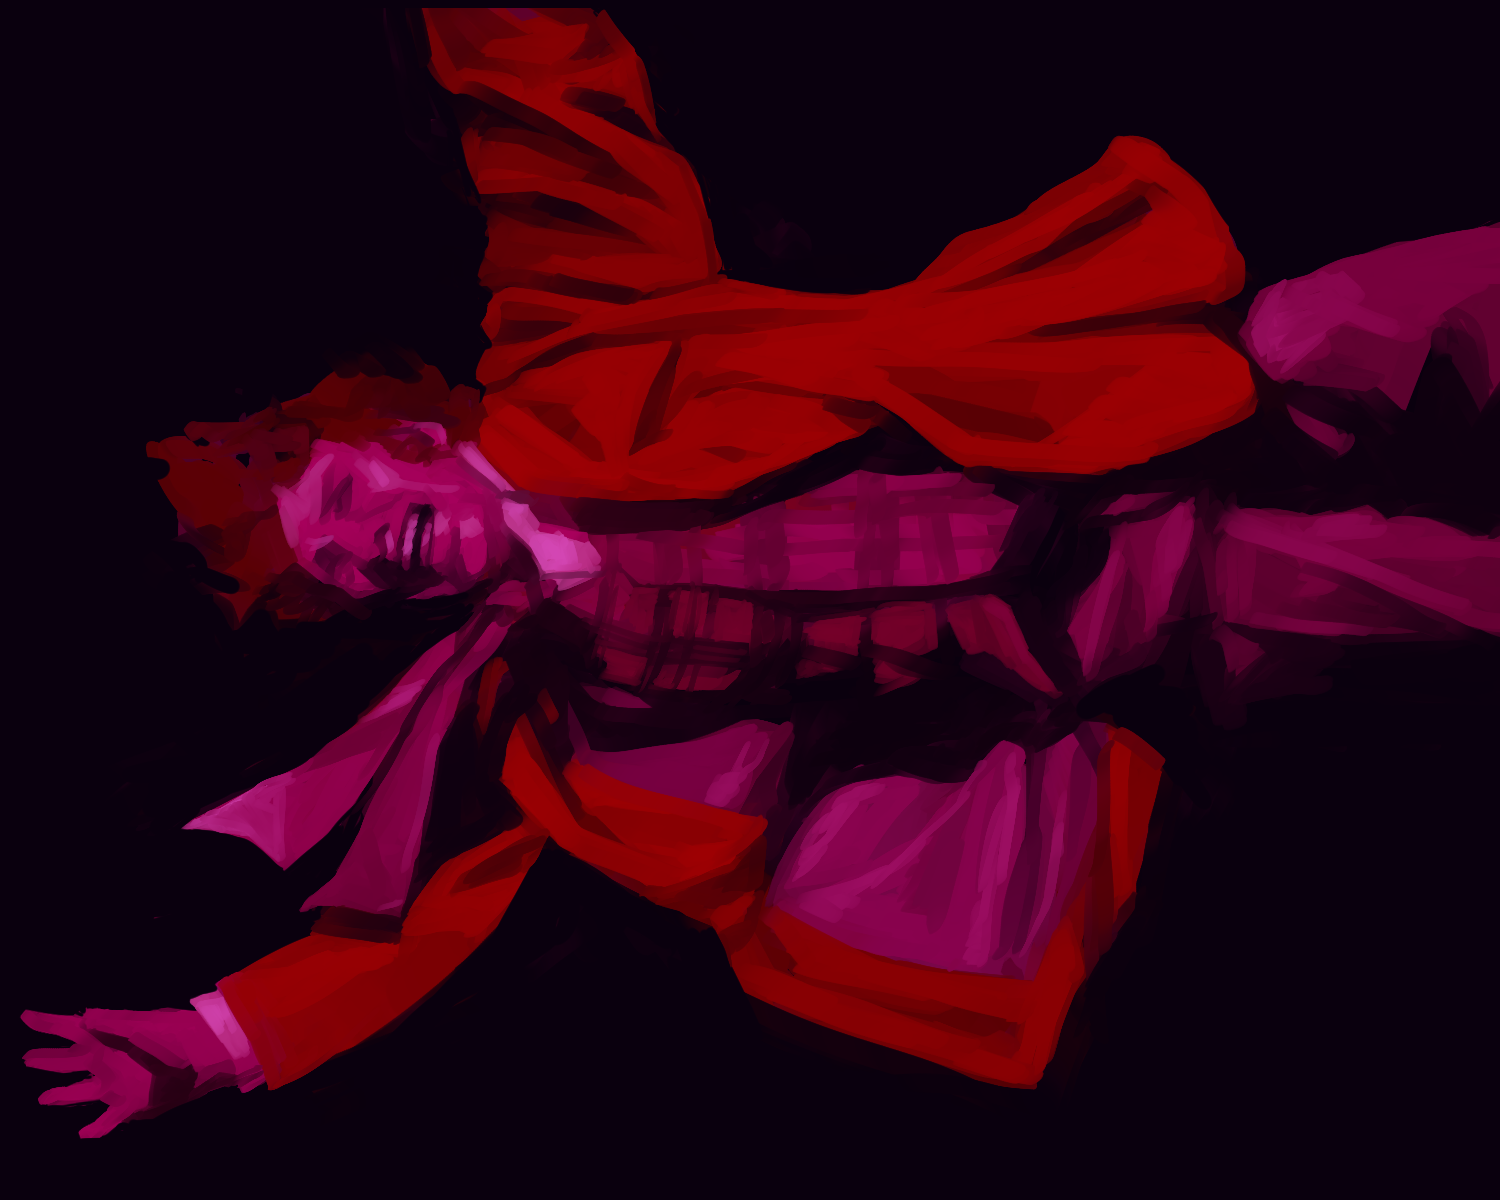 Digital painting of the fourth doctor falling through a void and screaming, lit all in red.